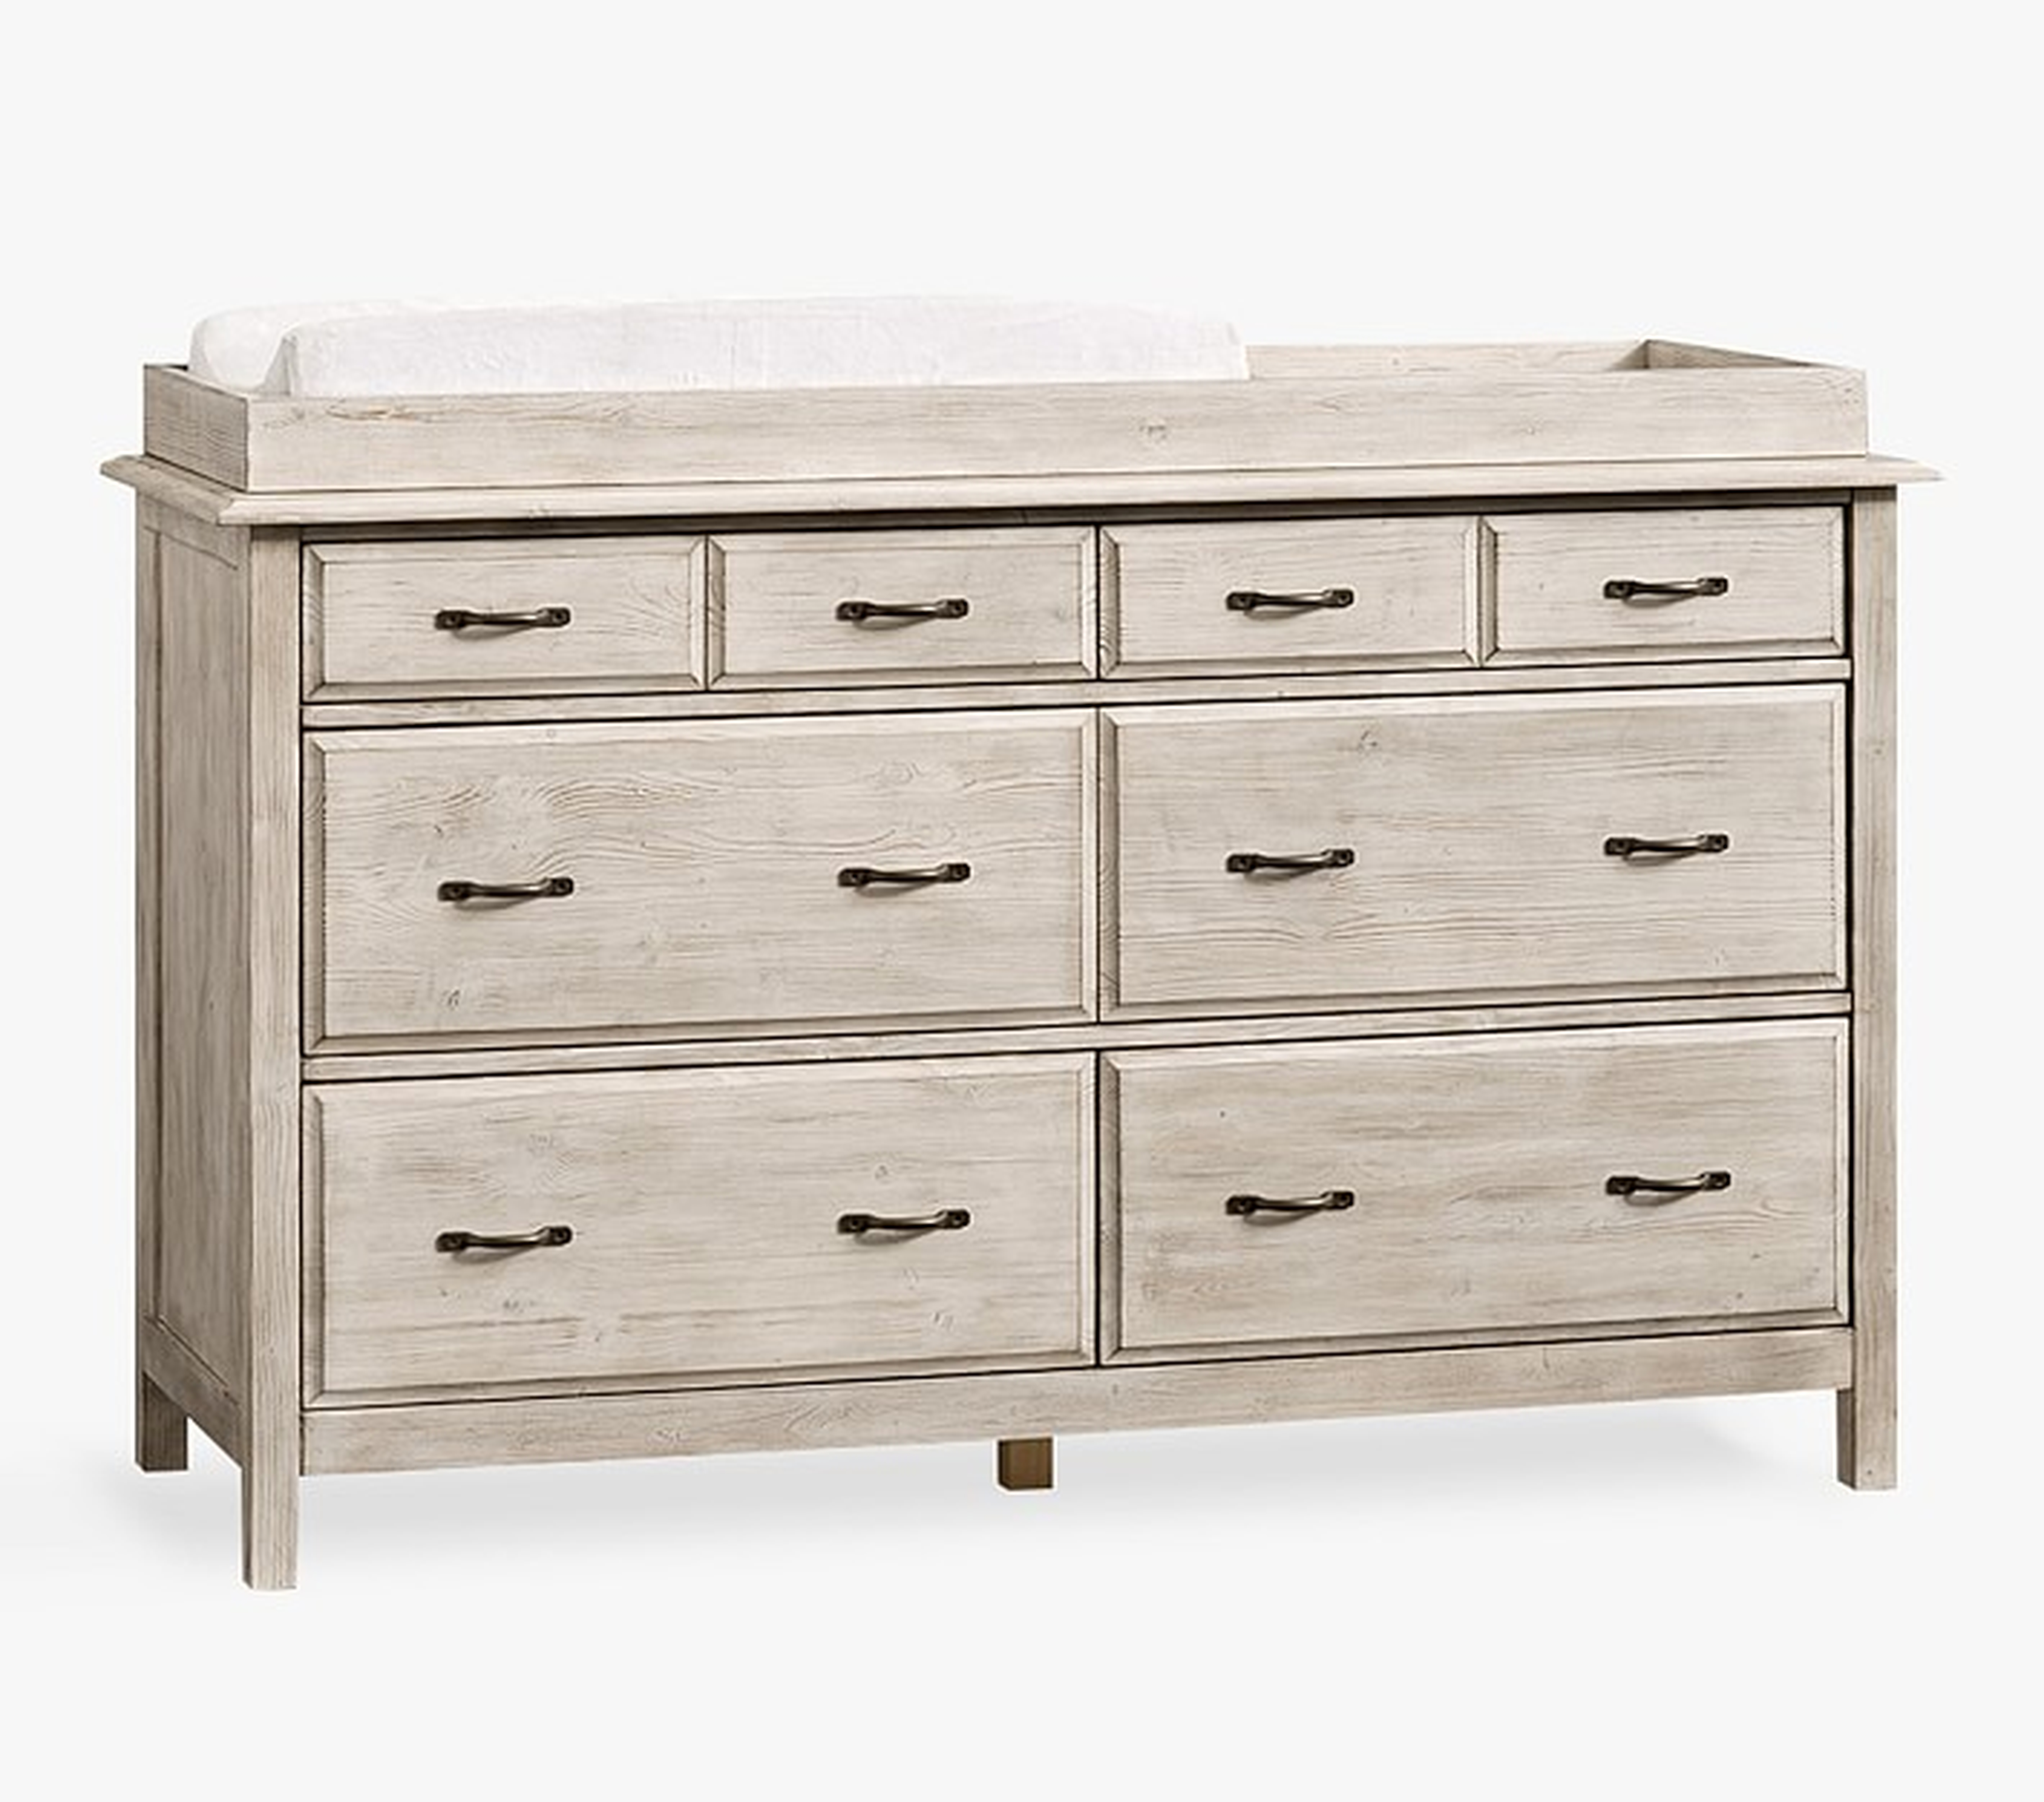 Rory Extra Wide Dresser & Topper Set, Weathered White - Pottery Barn Kids